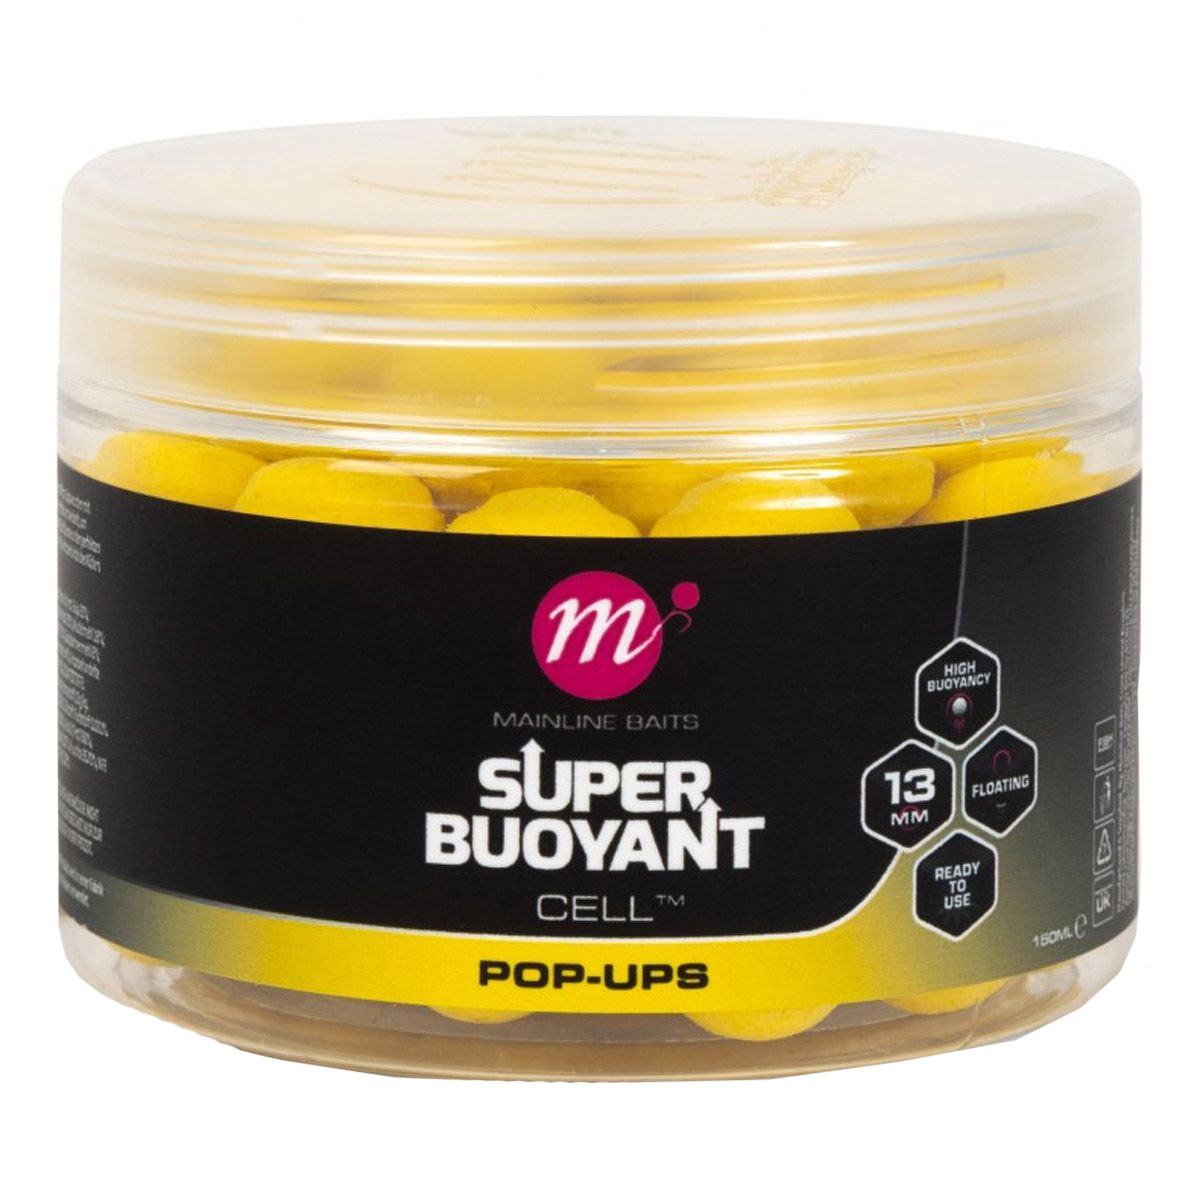 Mainline Super Buoyant Pop-Ups Yellow 13 MM -  Cell